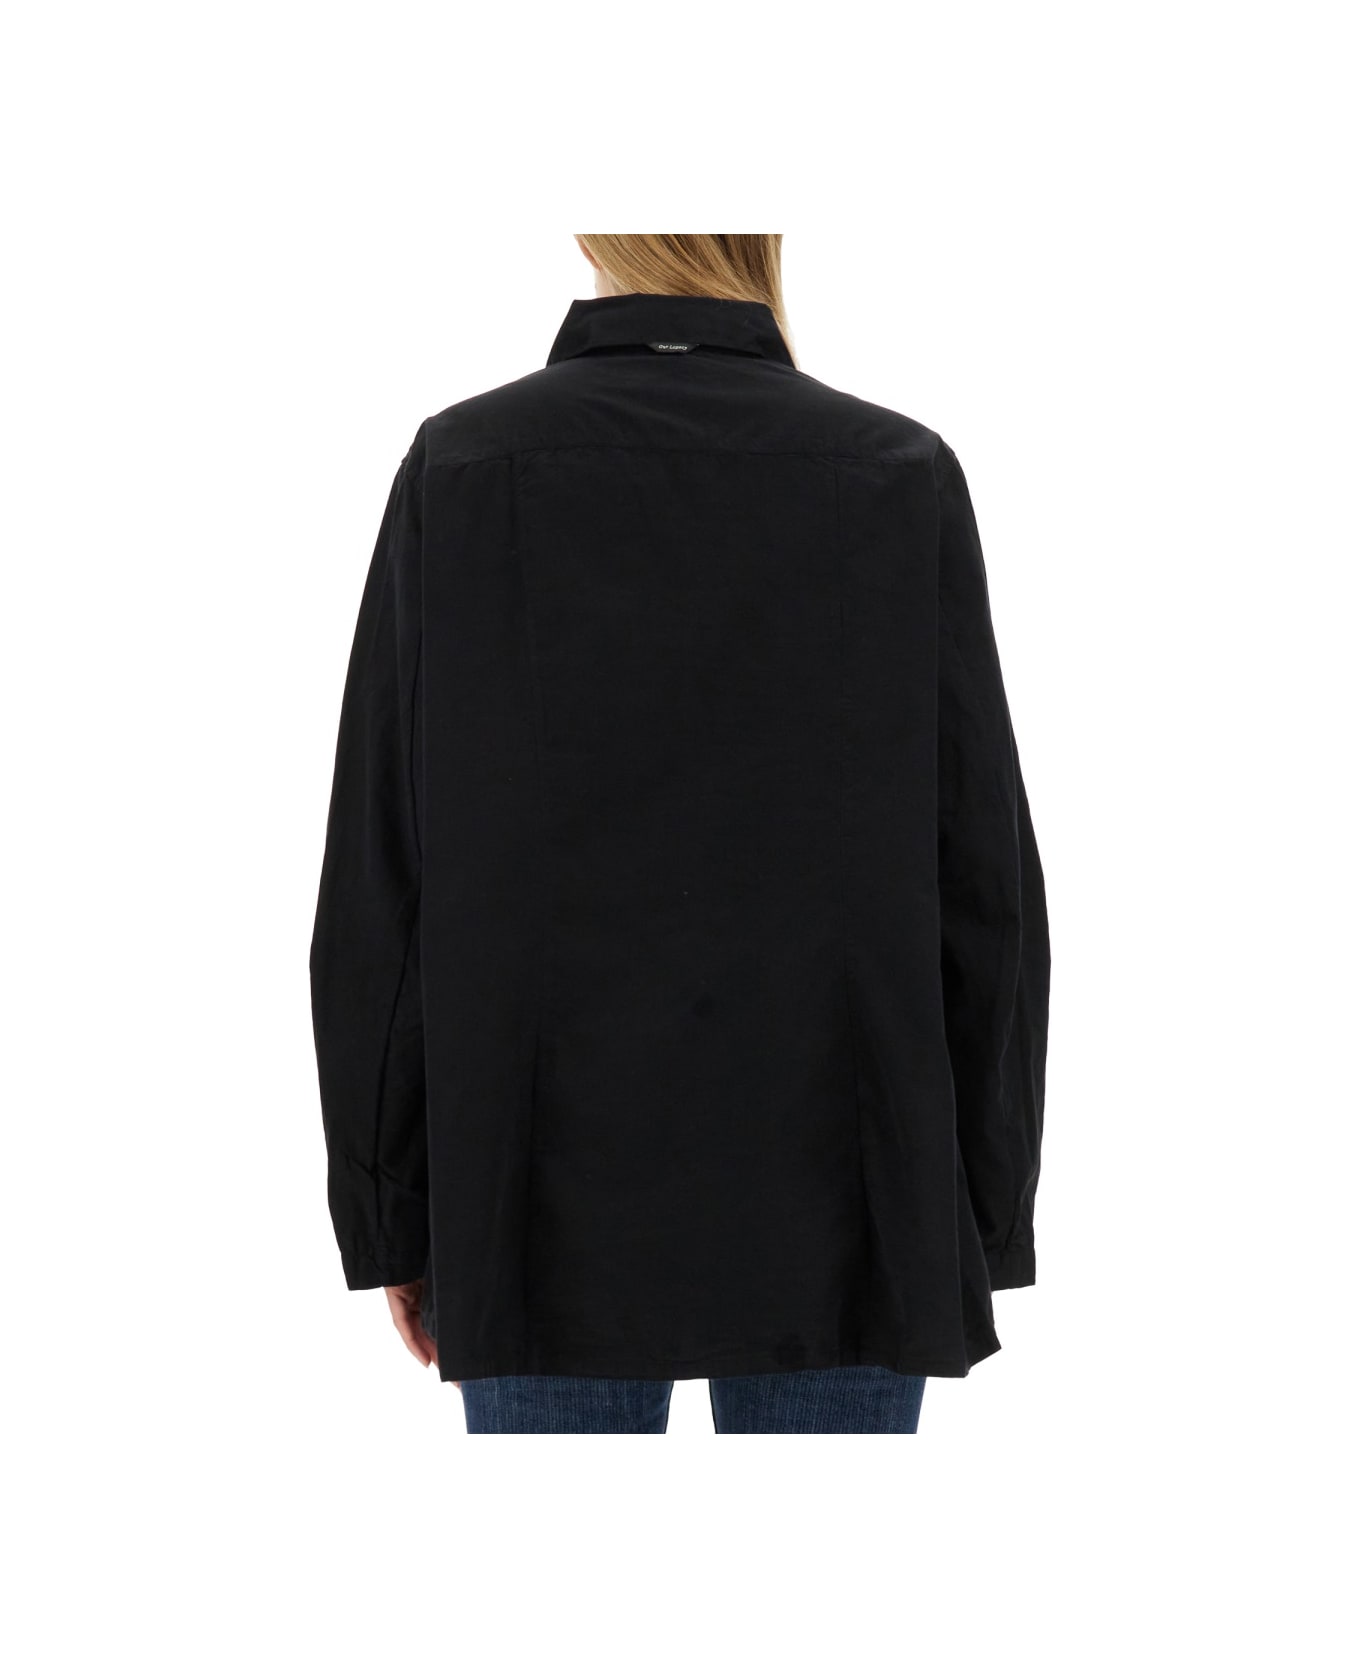 Our Legacy Oversize Fit Shirt - BLACK